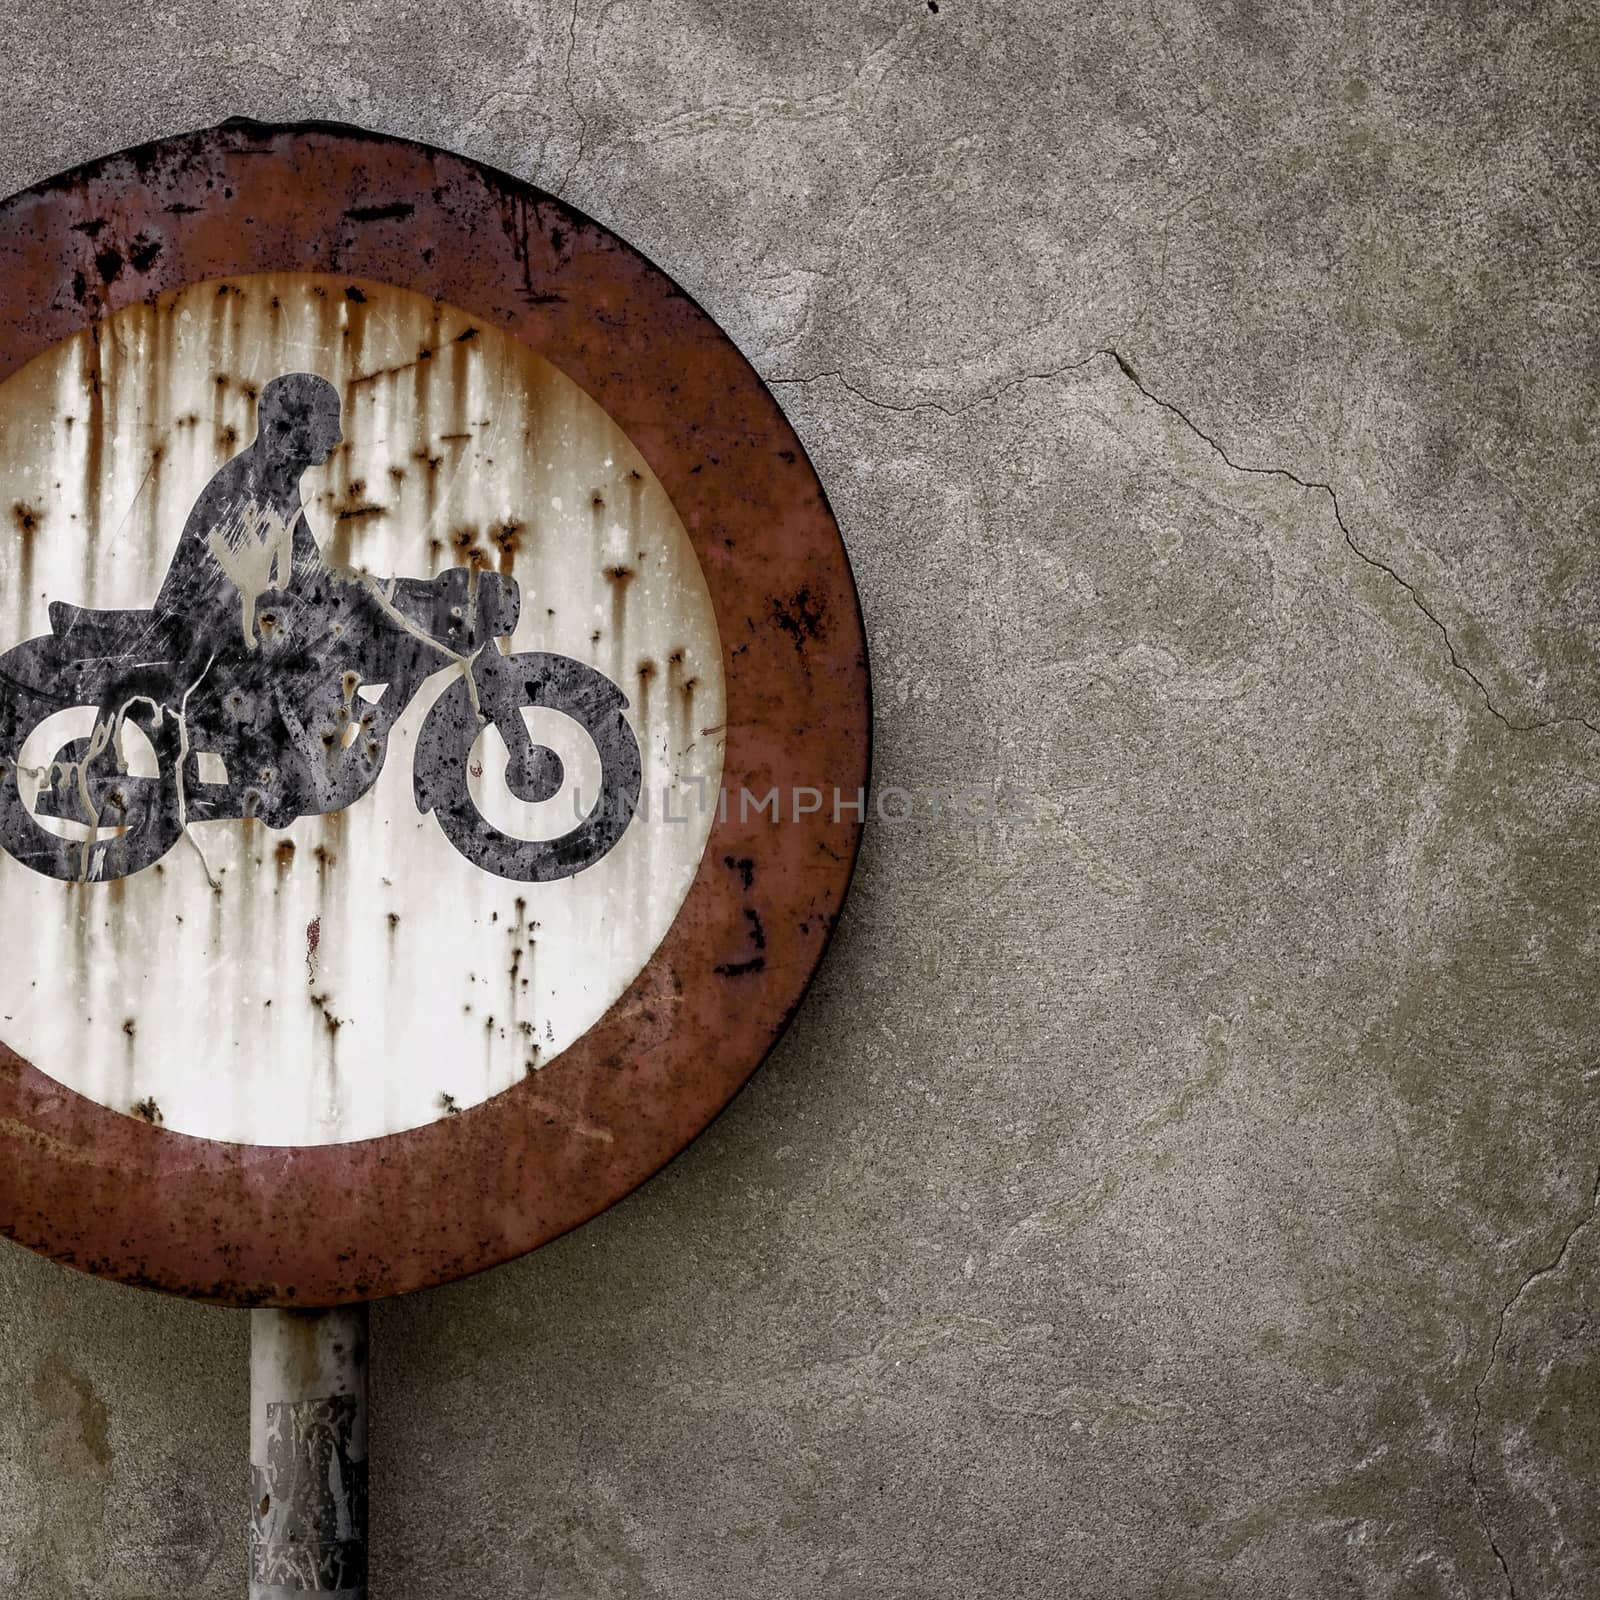 Road sign ban for motorcycles, rusted from the elements.